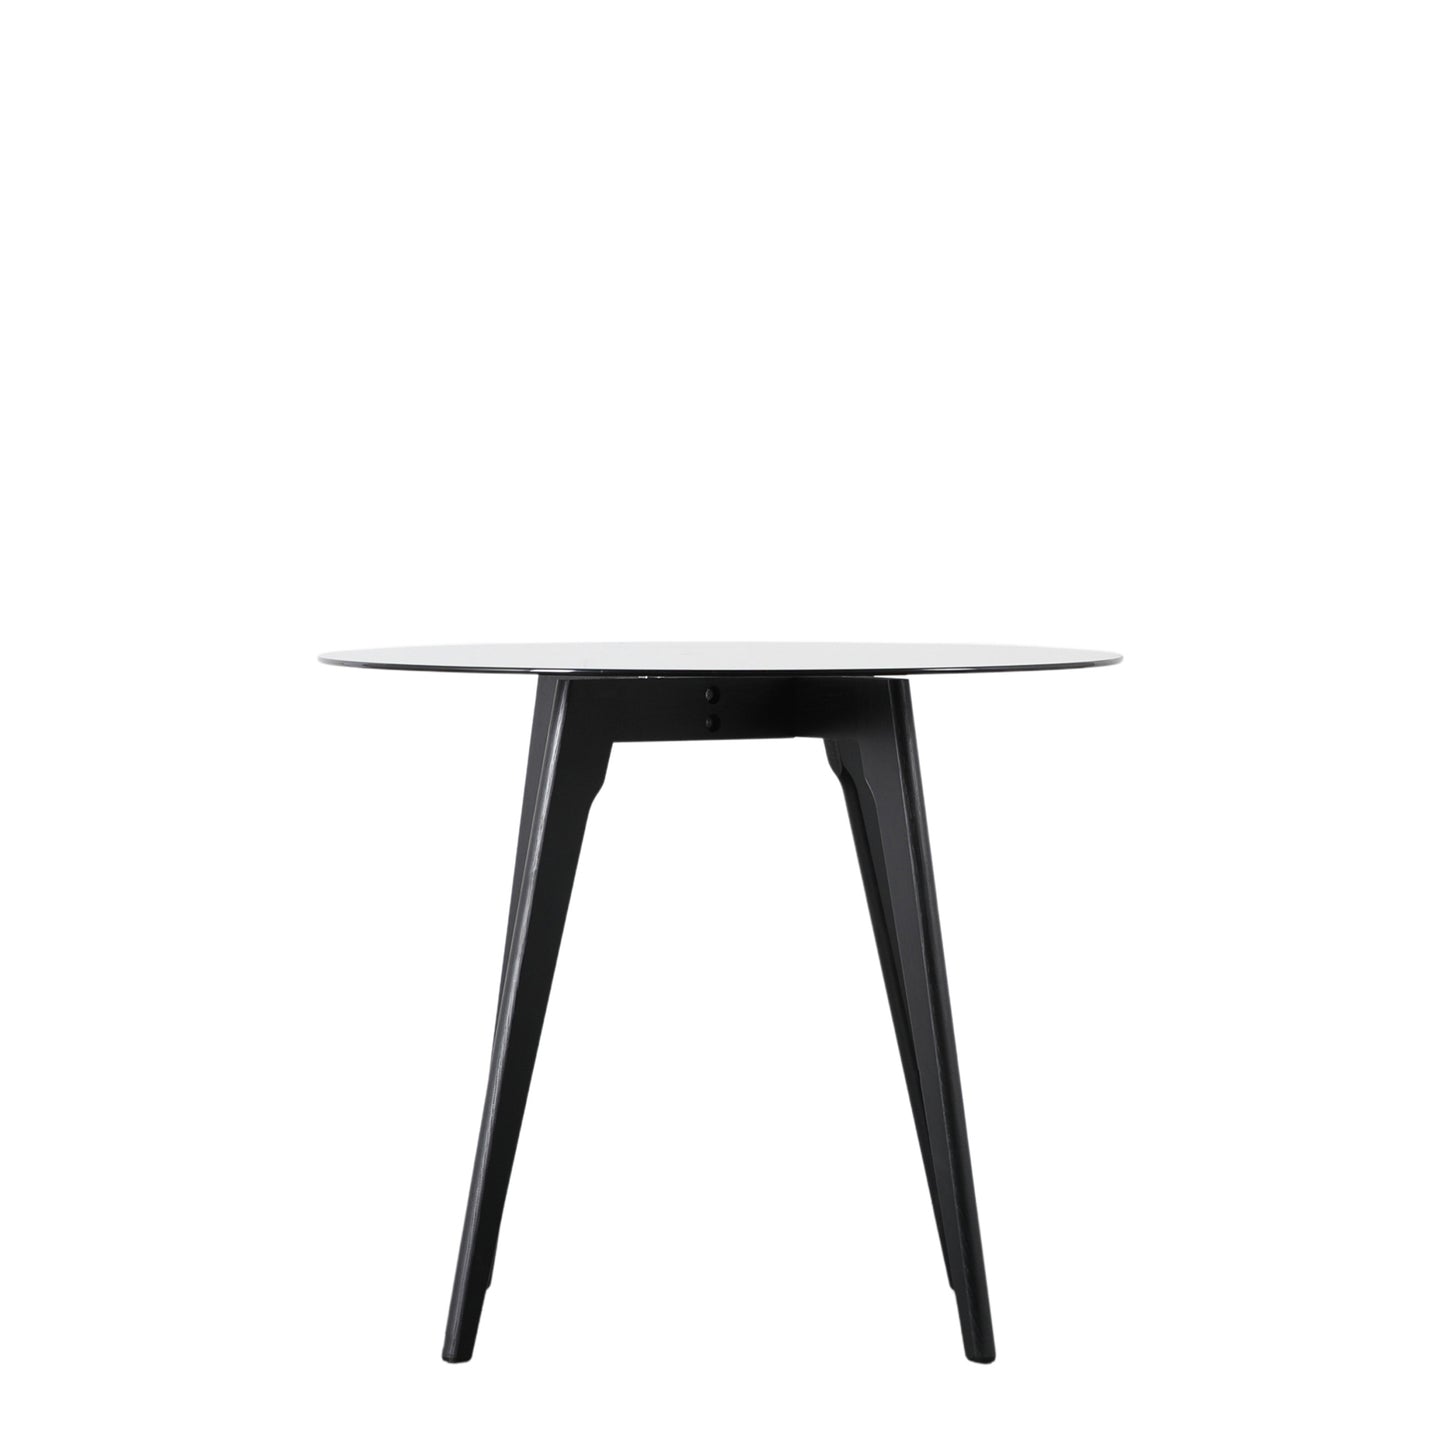 A Kikiathome.co.uk Ashprington Round Dining Table Black 900x900x750mm with black legs and a glass top for interior decor.